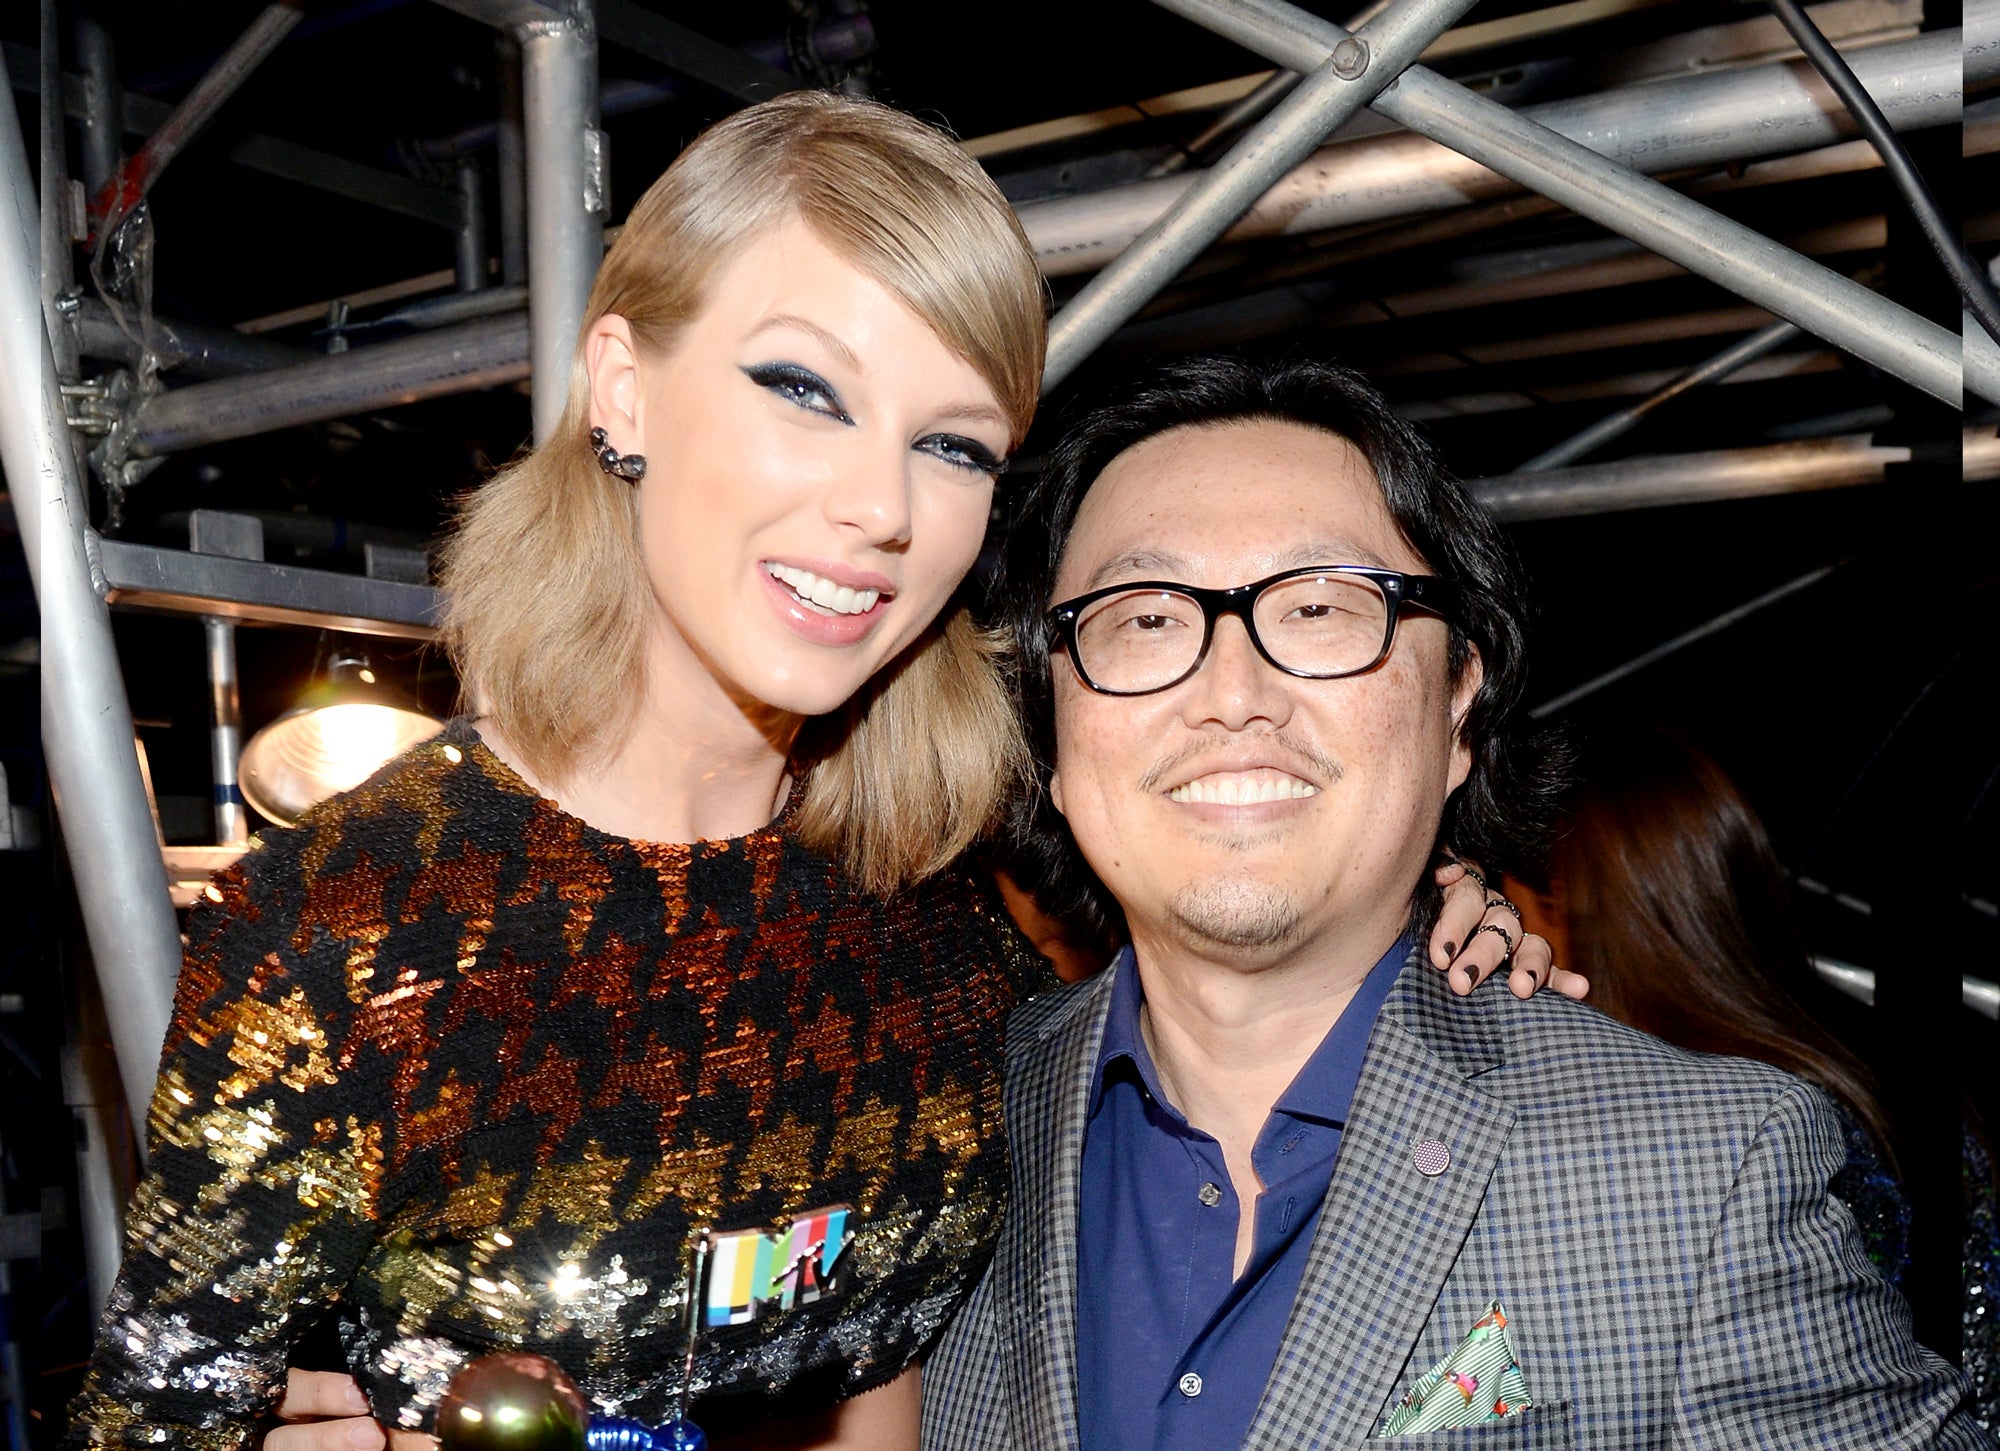 Beyhive Stings Director Who Said Beyoncé Copied Taylor Swift's "Bad Blood”
